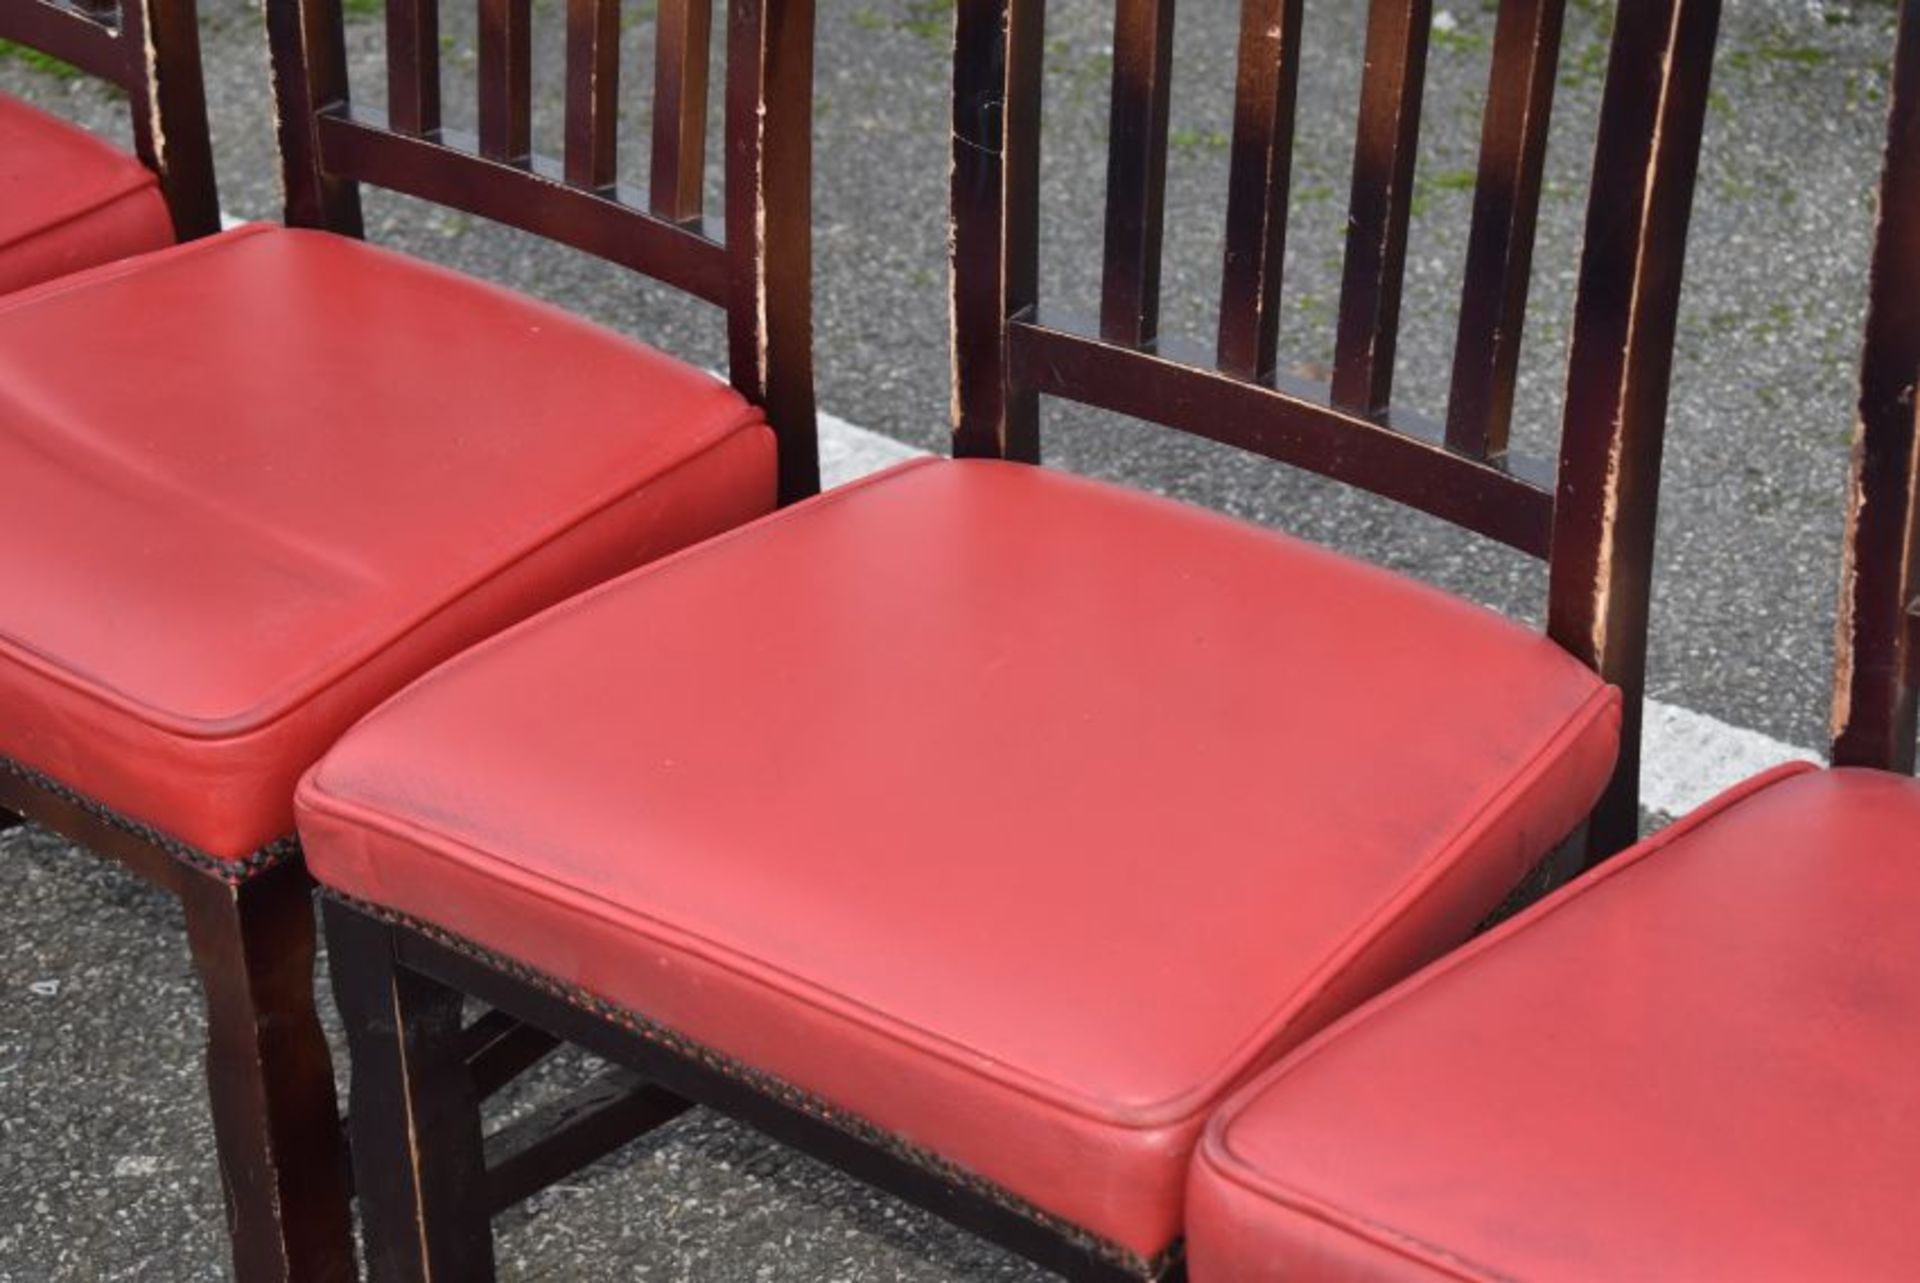 8 x Restaurant Dining Chairs With Dark Stained Wood Finish and Red Leather Seat Pads - Recently - Image 5 of 7